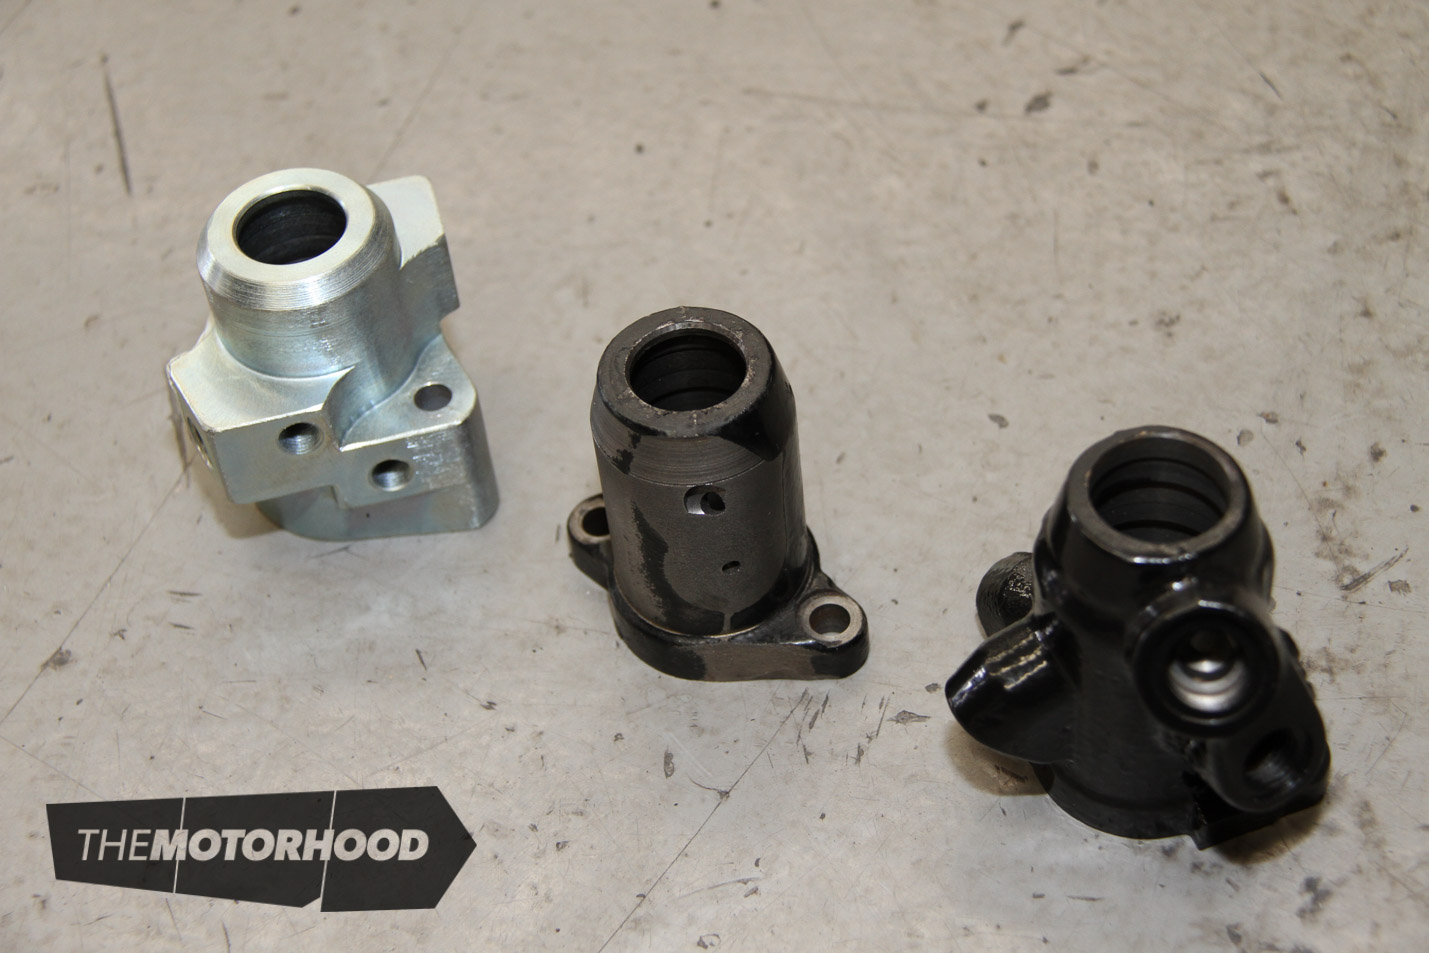 You can see the progress here as the original valve body (right) was first machined down to fit into the narrow space required (centre), before a full custom item was produced (left), shifting the port positions for optimal hose position.